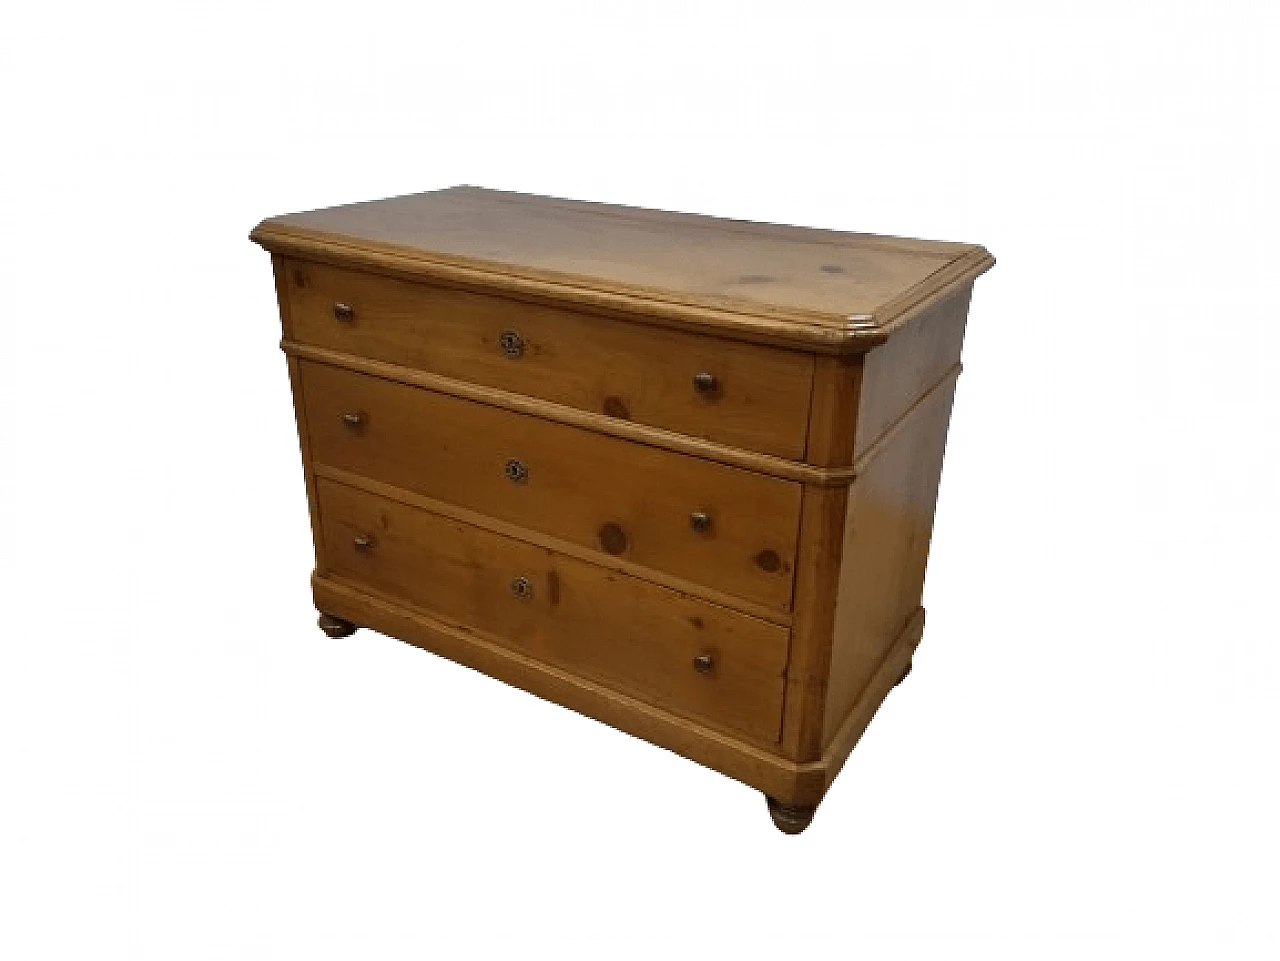 Rustic fir chest of drawers, late 19th century 1